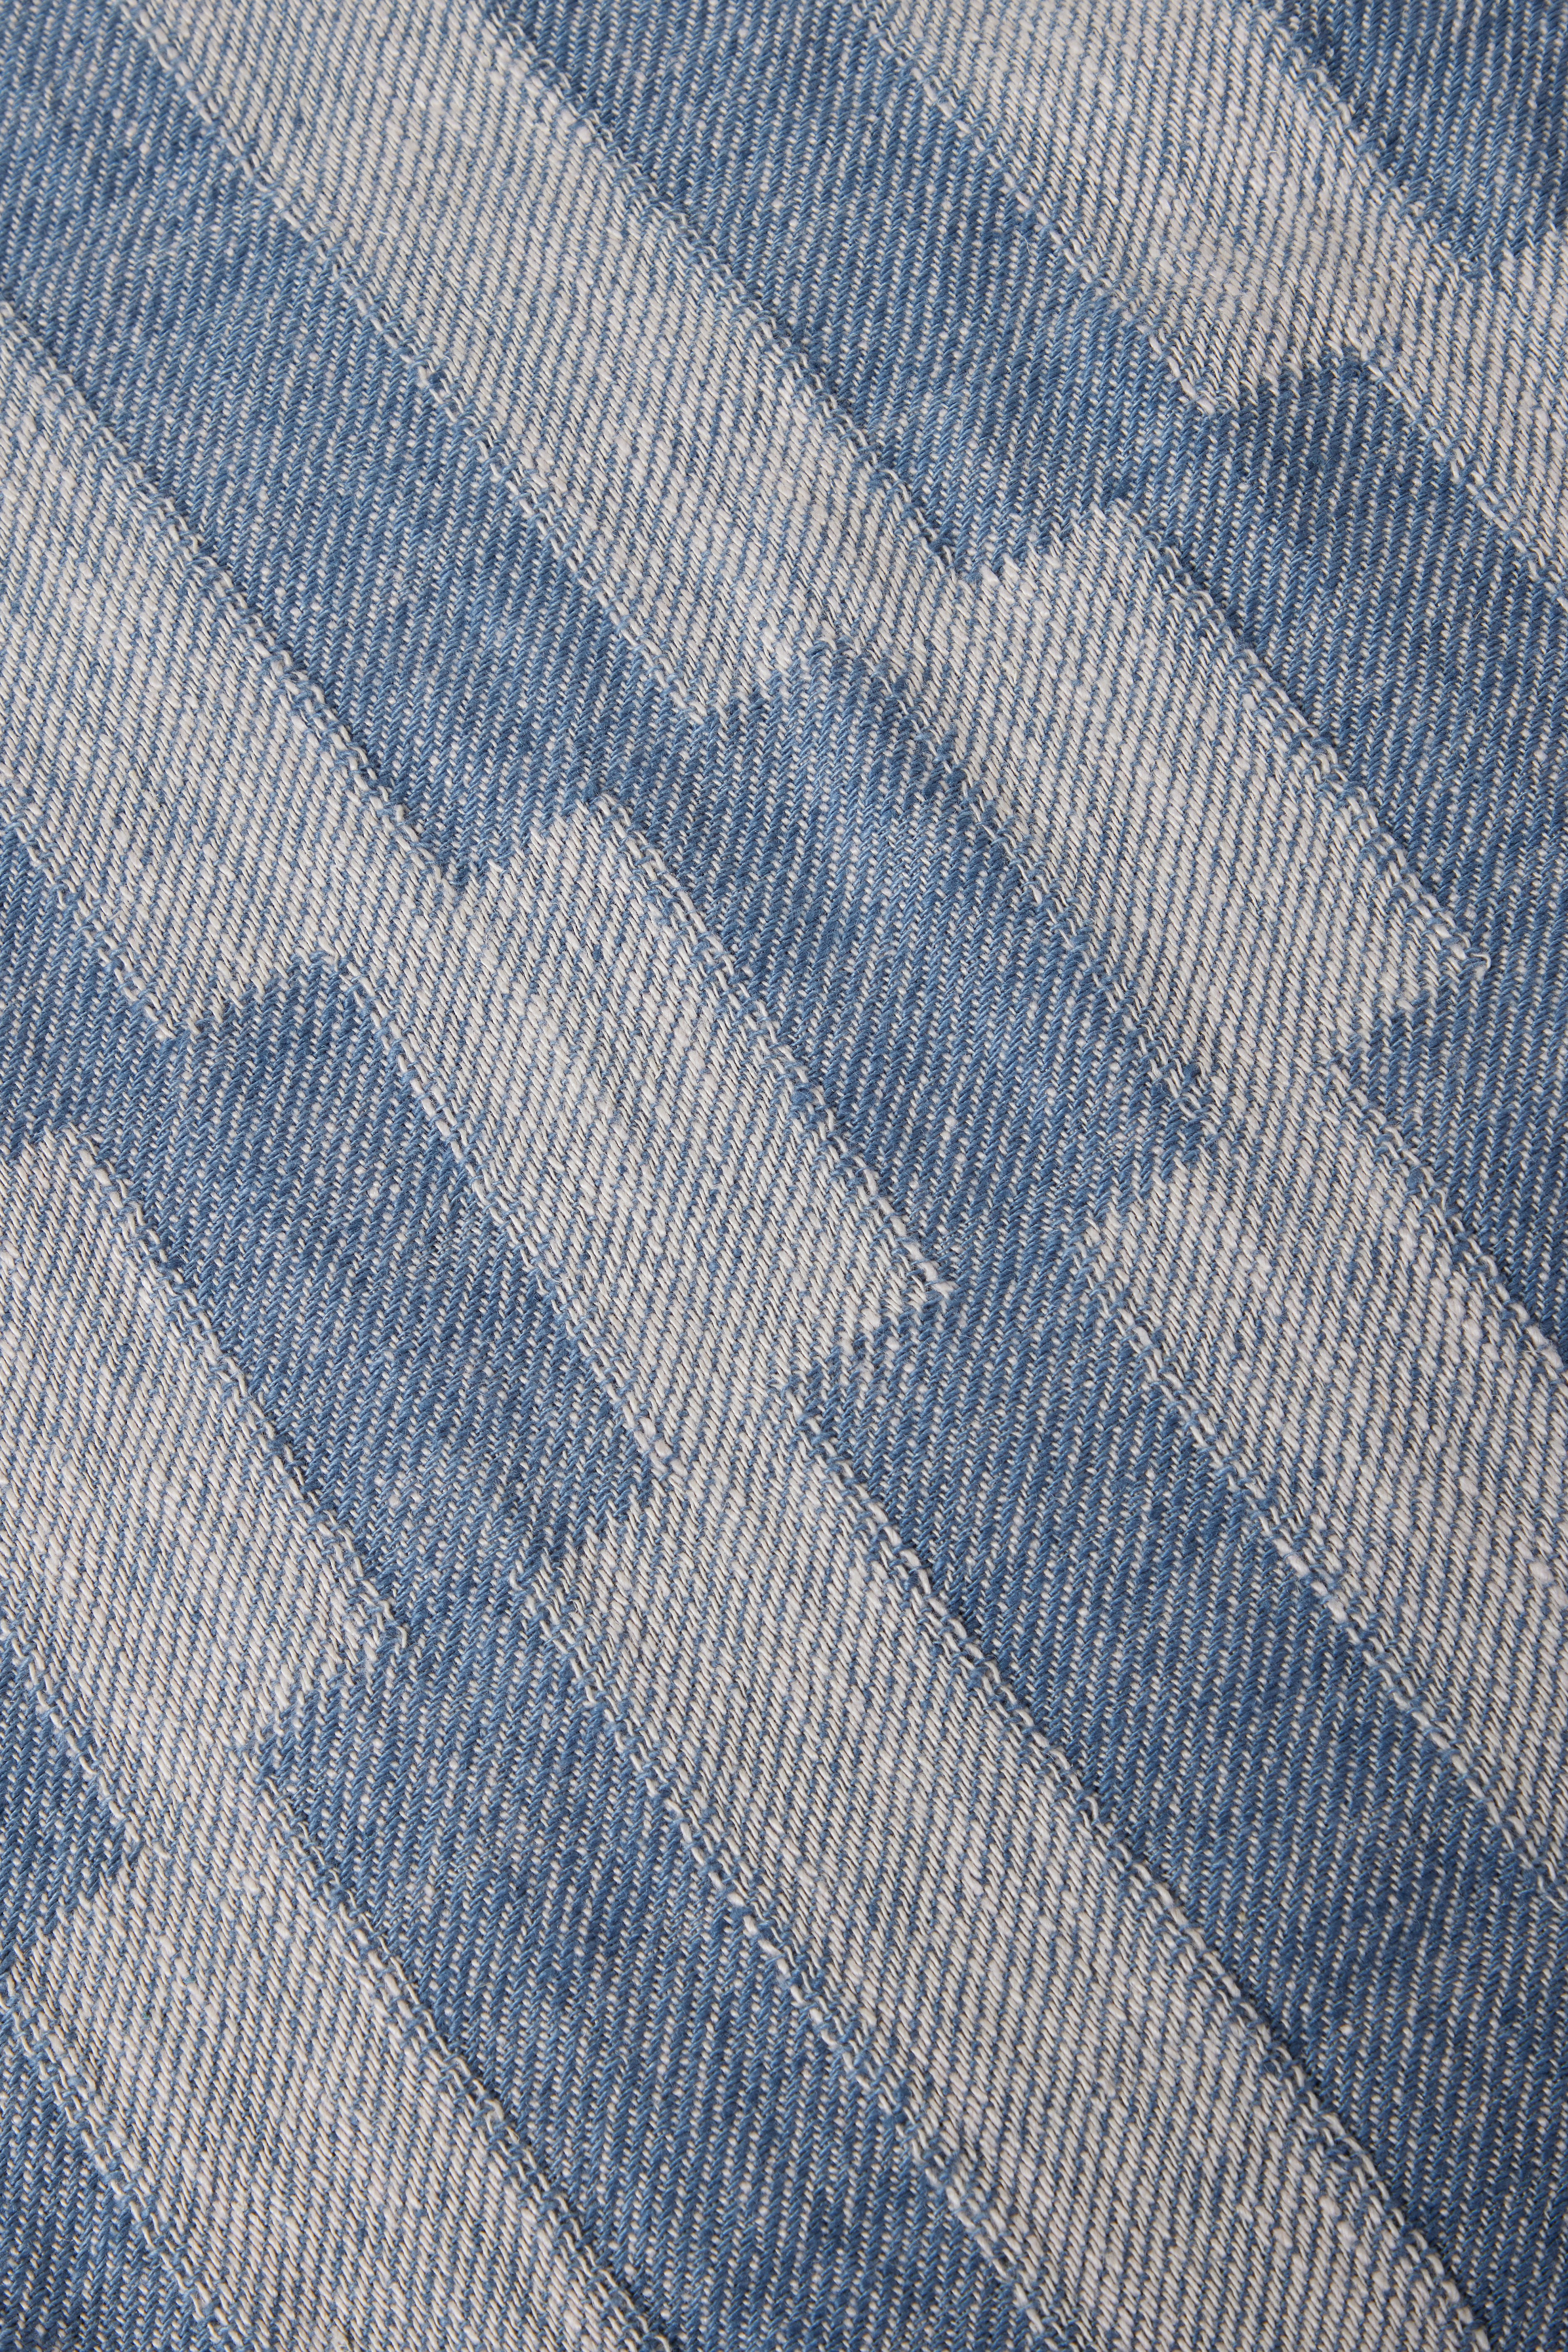 a close up of a blue and white striped rug